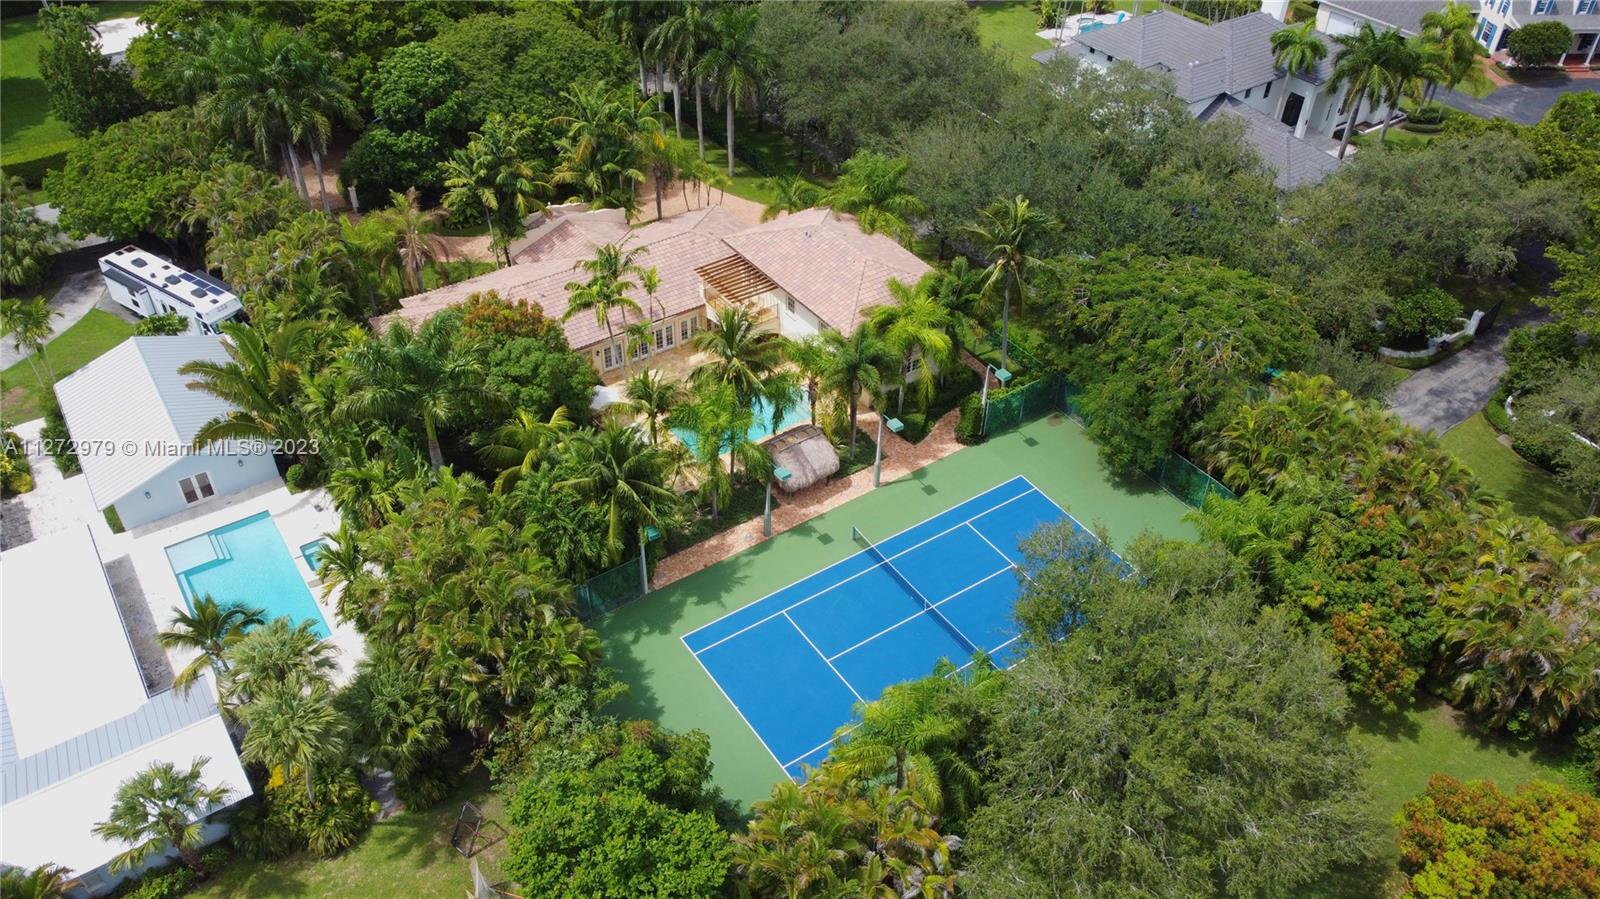 PRIVACY-LUXURY-SECURITY Escape to your Lushly Landscaped Tennis Heaven Two Story Resort Style Villa, Located in Prime North Pinecrest. This split plan (2-3) 5BR/5BA,(4-Suits) fully gated, Corner Lot. An Immaculate Turn-key Estate thoroughly Remodeled in 2020 & Rebuilt 2011 W/ upgrades to the highest standards for hurricane protection, W/MDCPA Listing Effective Age@ 2011, Quality 1 Grade 1. Captivating open view line of sight from social areas & kitchen to all the action on the regulation sized N-S lighted tennis court and sparkling blue salt system pool. Huge open floor plan living room/dining room and amazing white quartz gourmet kitchen, with high ceilings, onyx and granite bathrooms, build-in-closets on every suite, amazing laundry room, state of the art security system and much more!